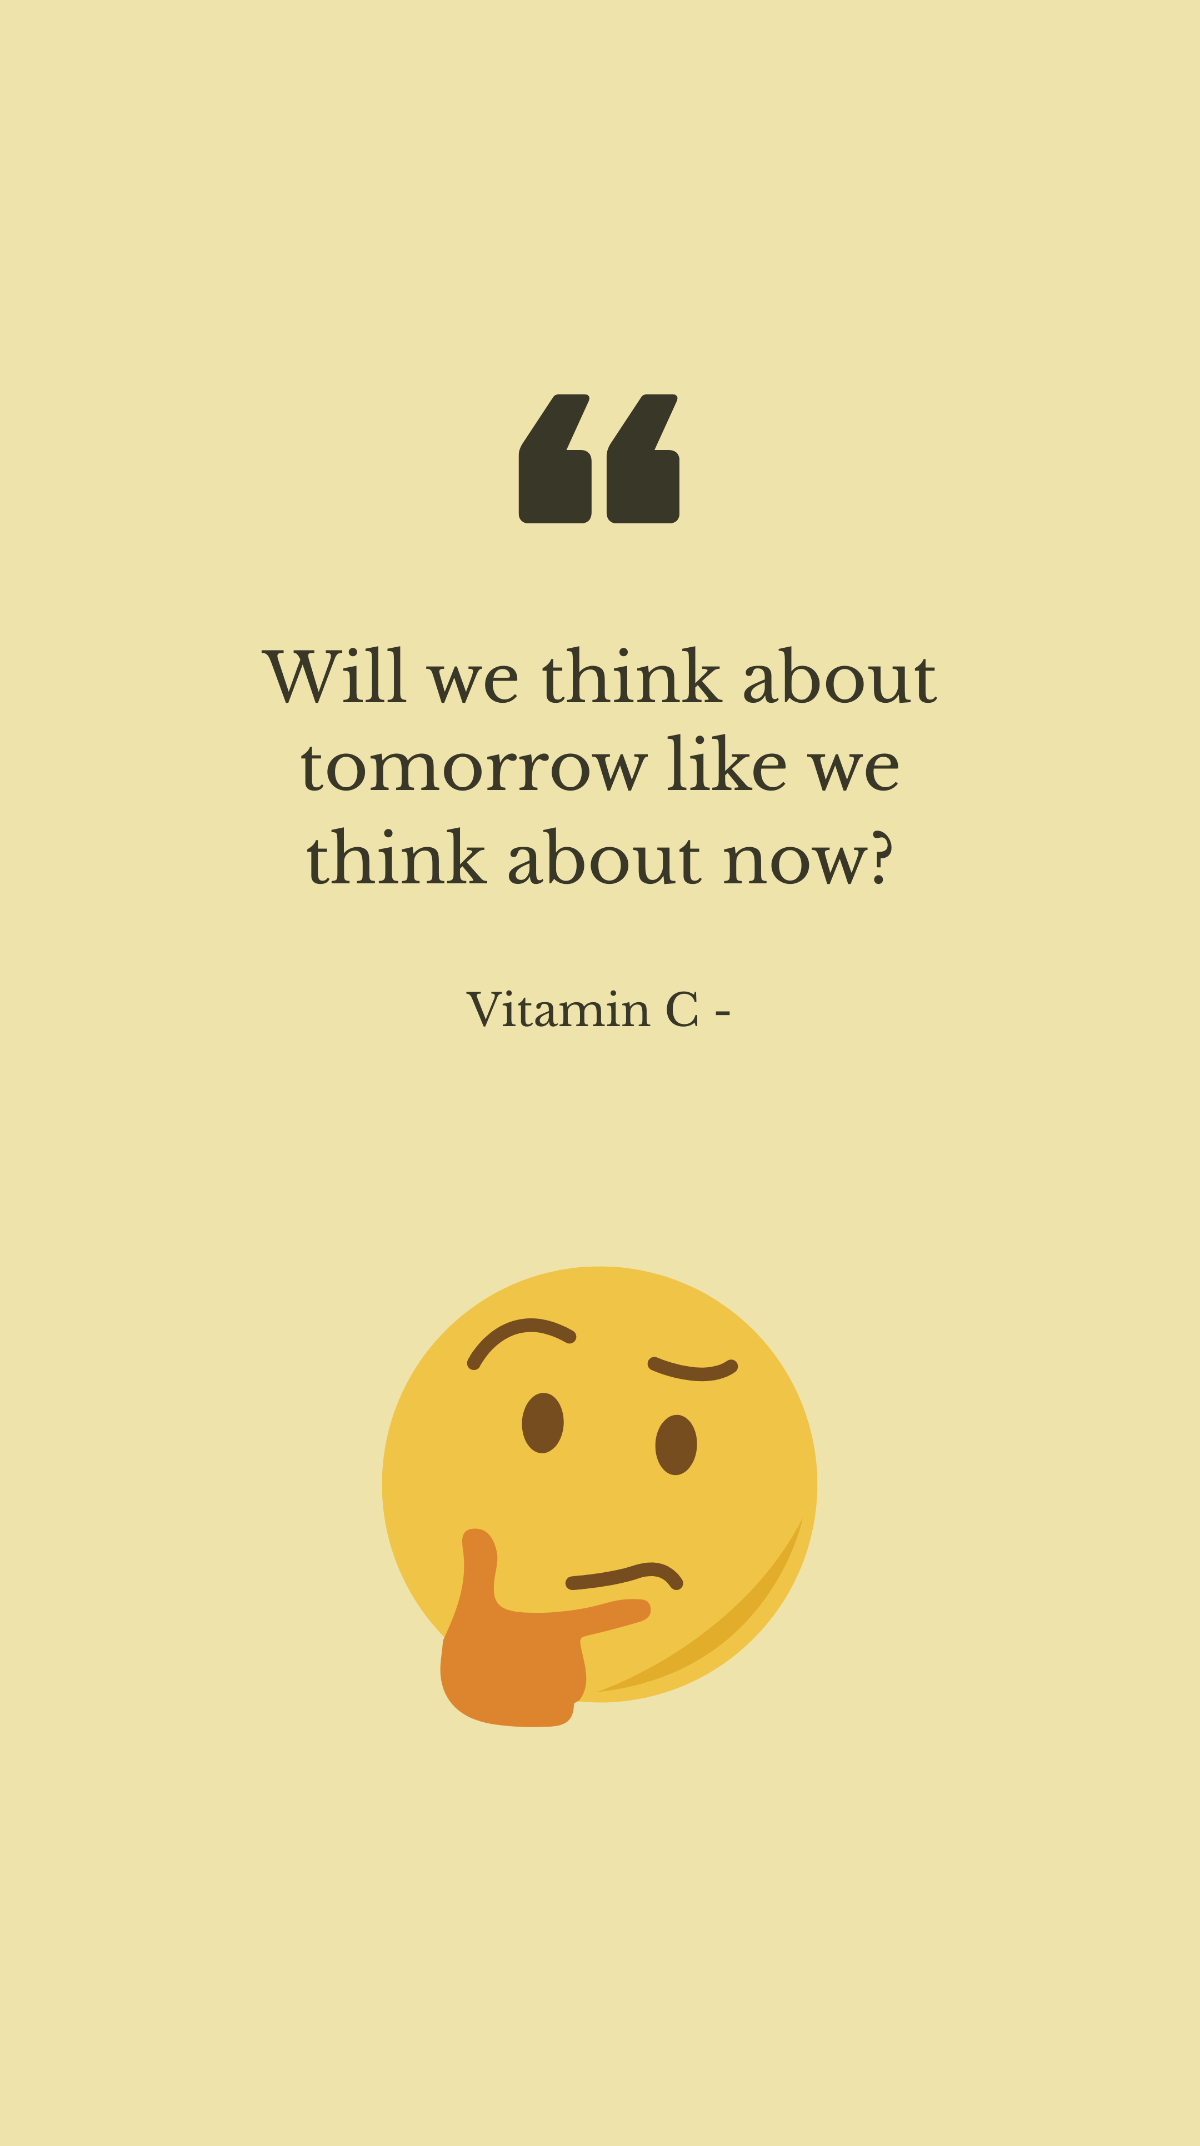 Vitamin C - Will we think about tomorrow like we think about now? Template